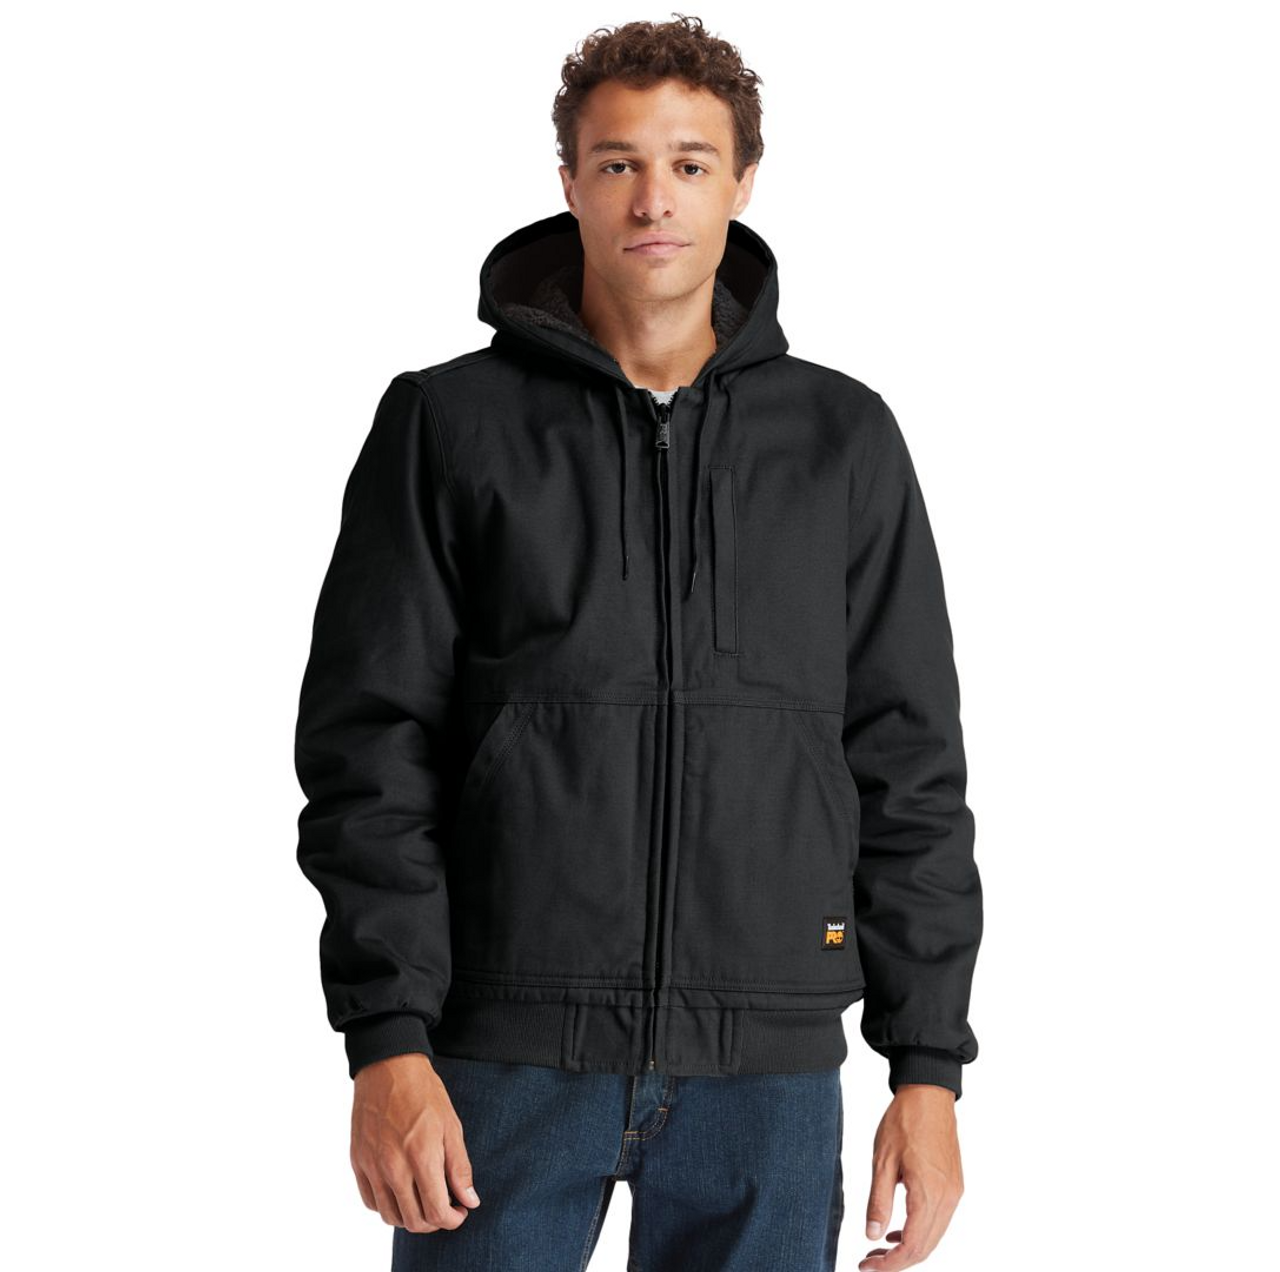 Timberland Pro Men's Gritman Lined Hooded Canvas Jacket - Black